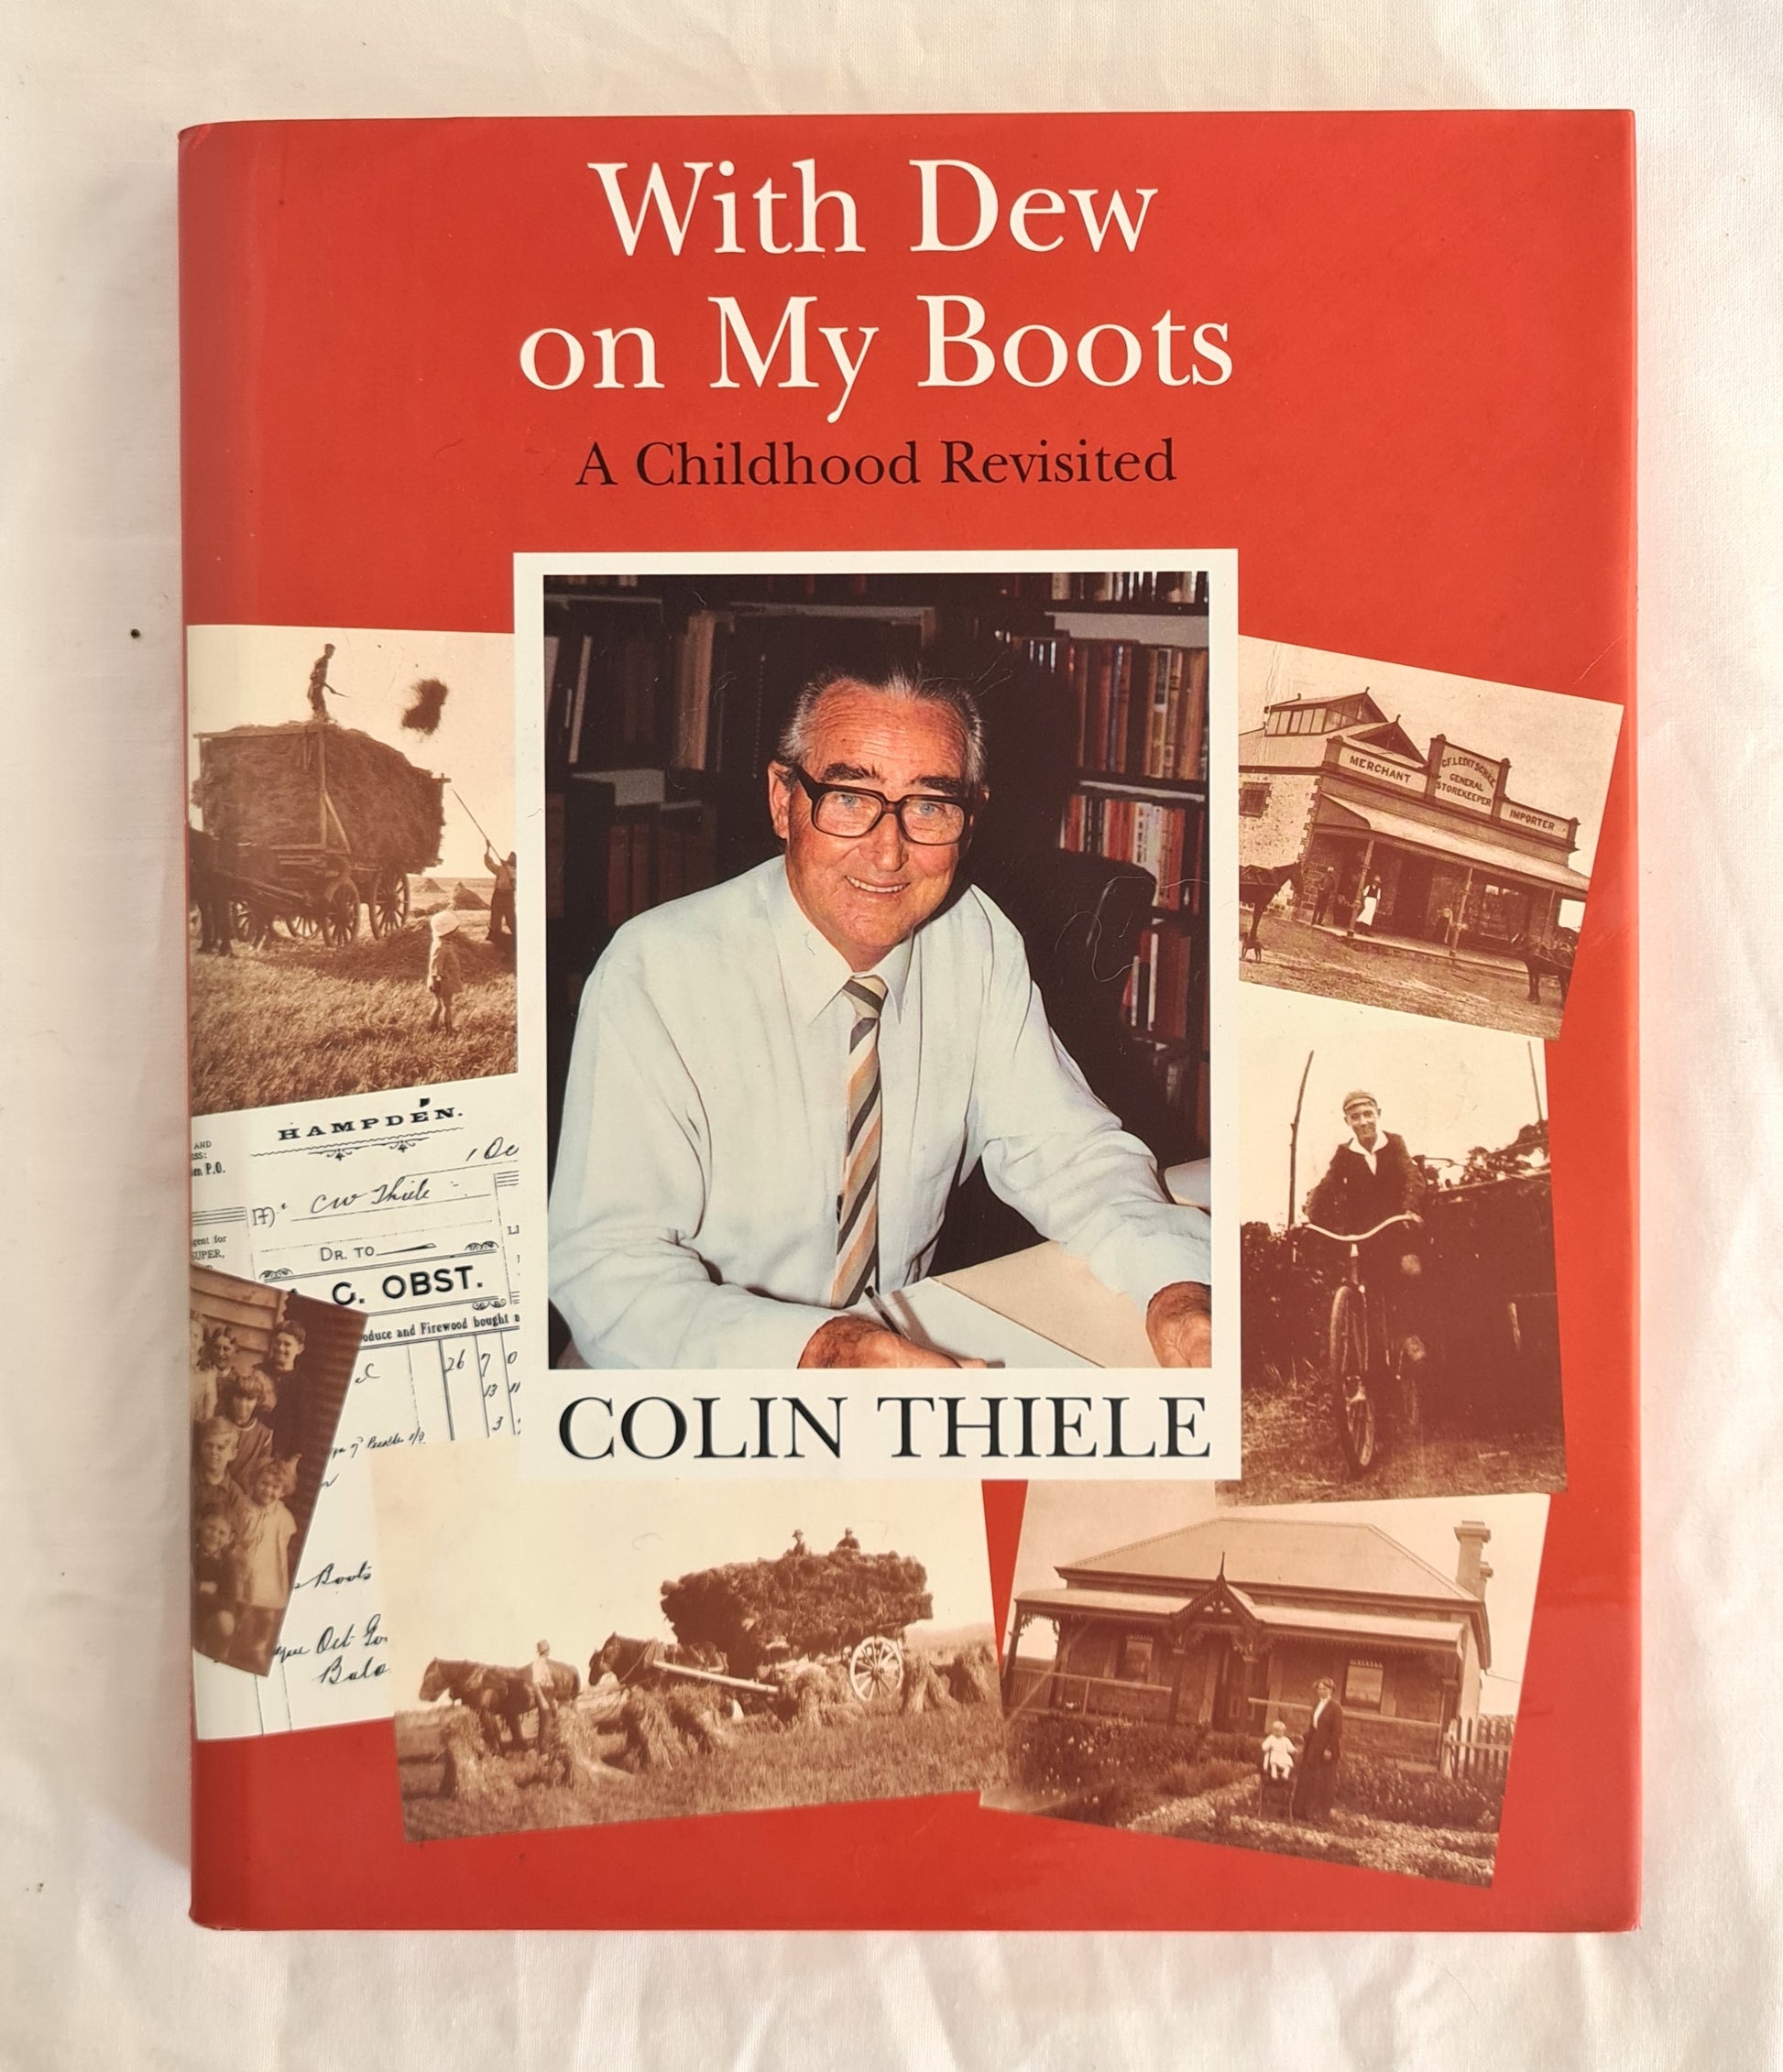 With Dew on My Boots  A Childhood Revisited  by Colin Thiele